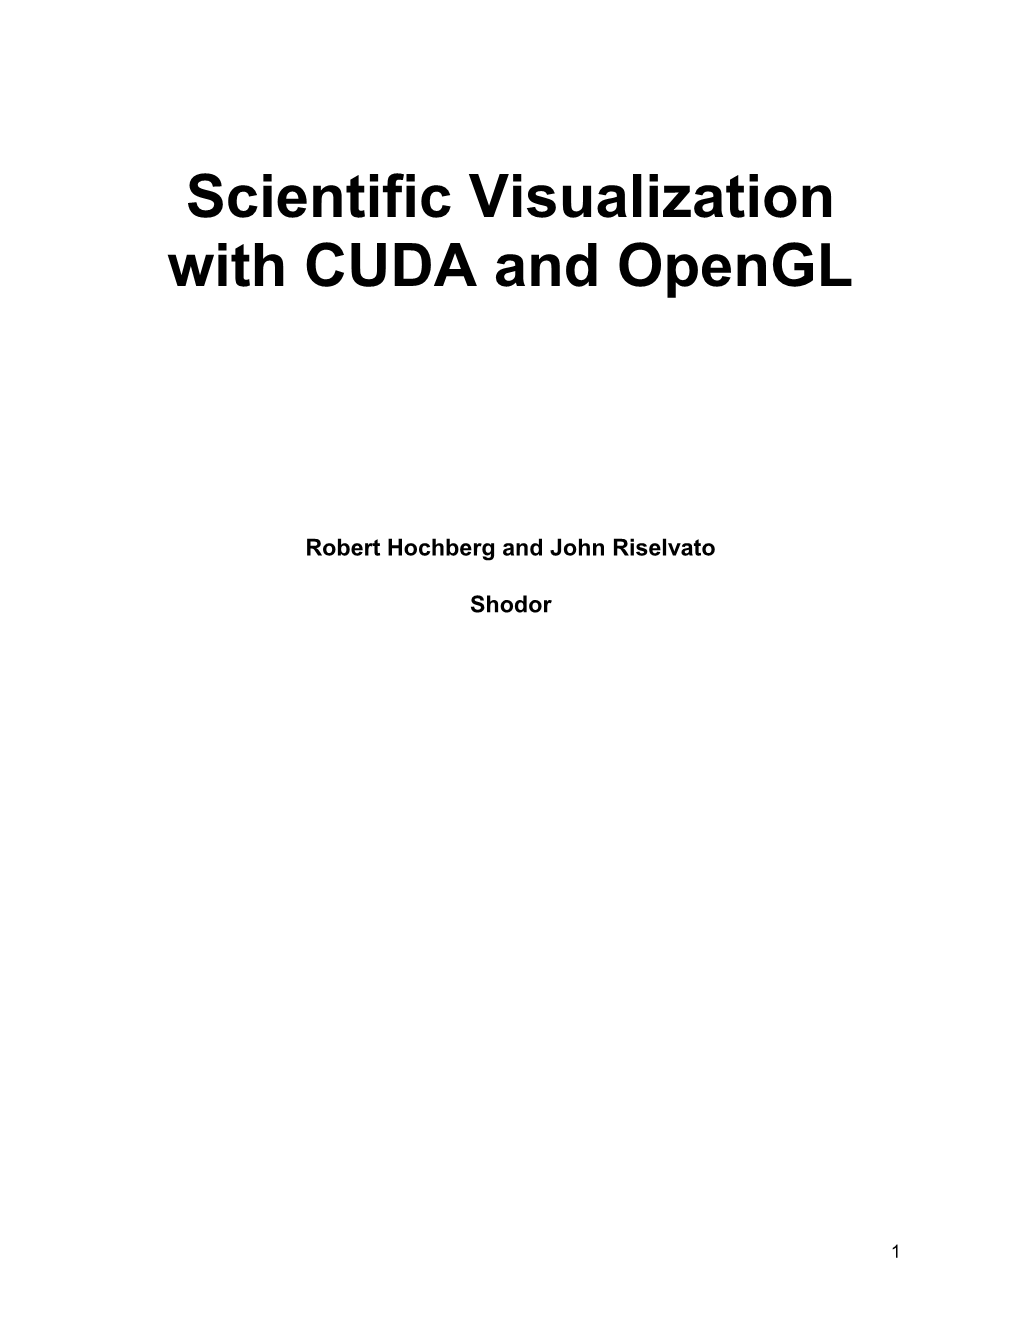 Scientific Visualization with CUDA and Opengl